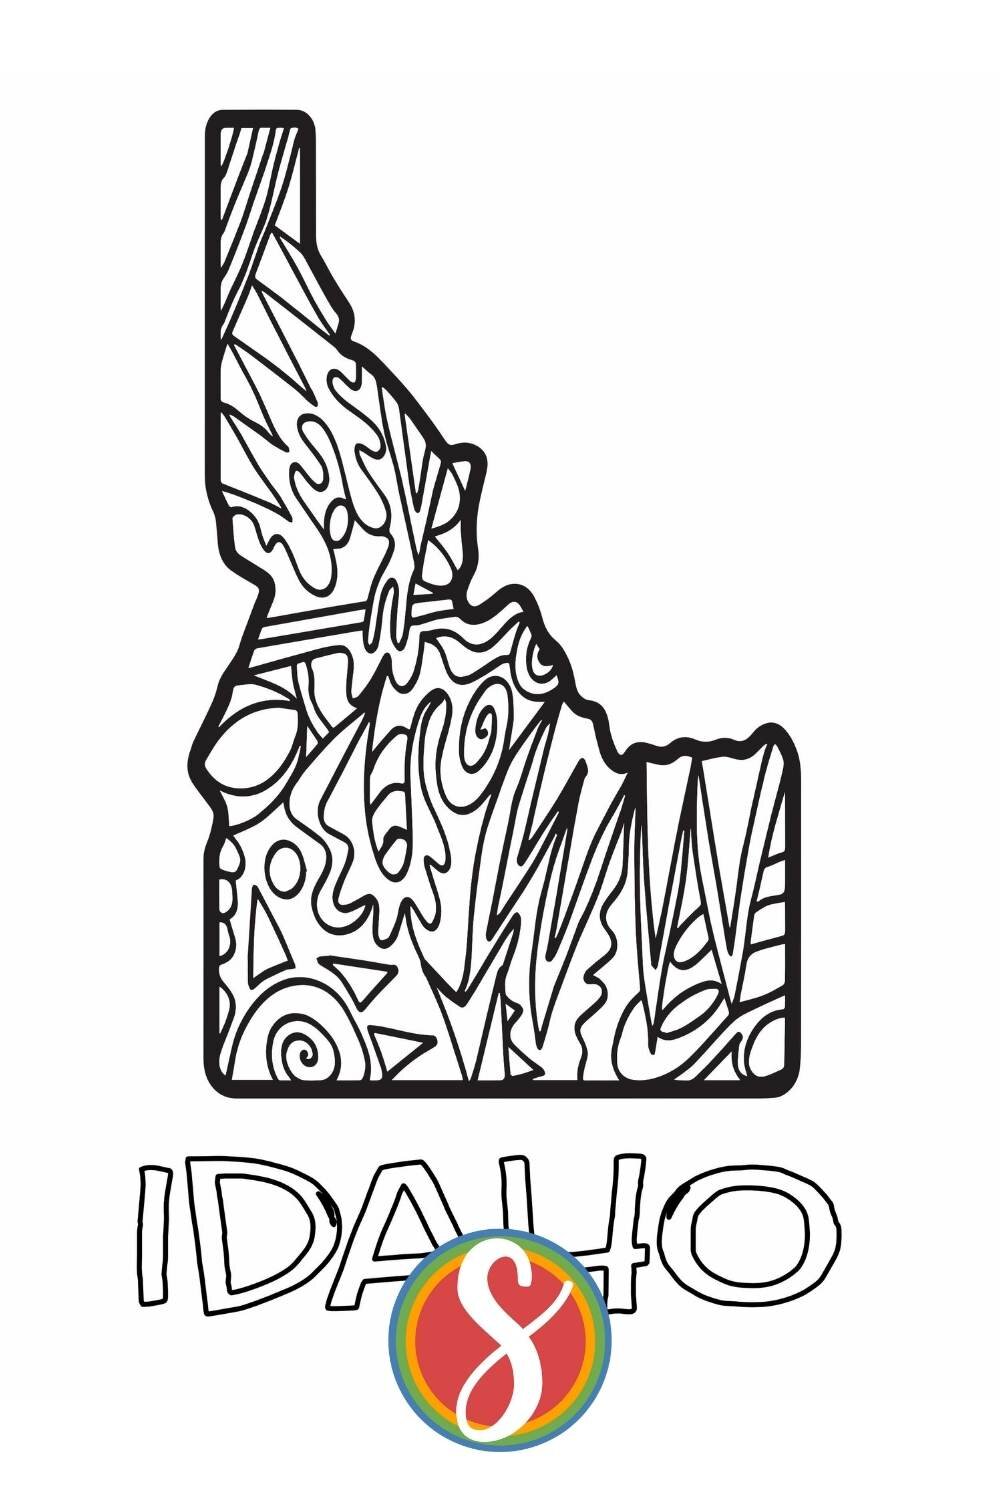 Free printable Idaho coloring page from Stevie Doodles - print and color 4 free Idaho-themed activity pages in this post from Stevie Doodles and find your state too!